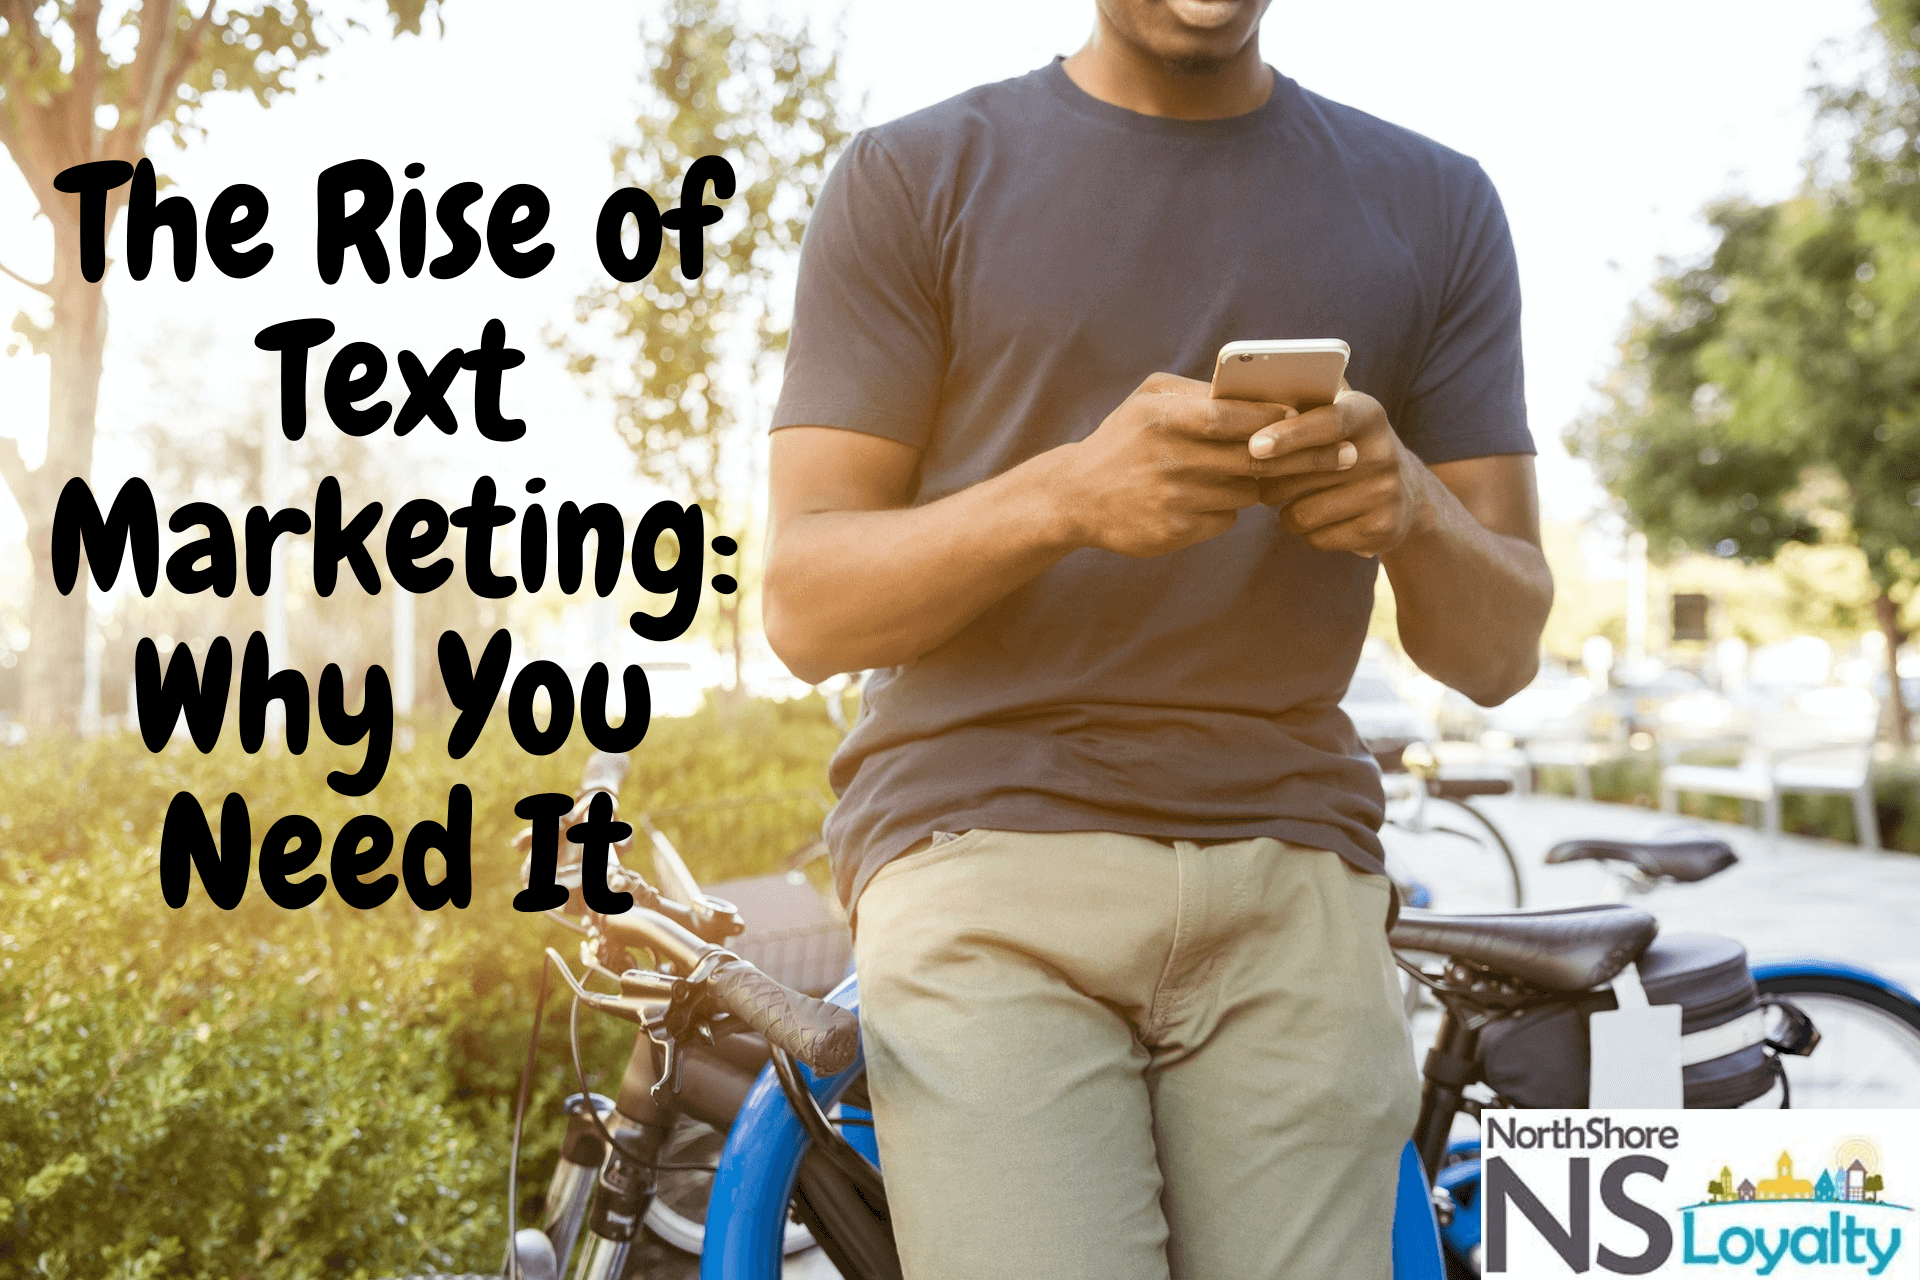 The Rise of Text Marketing: Why You Need It